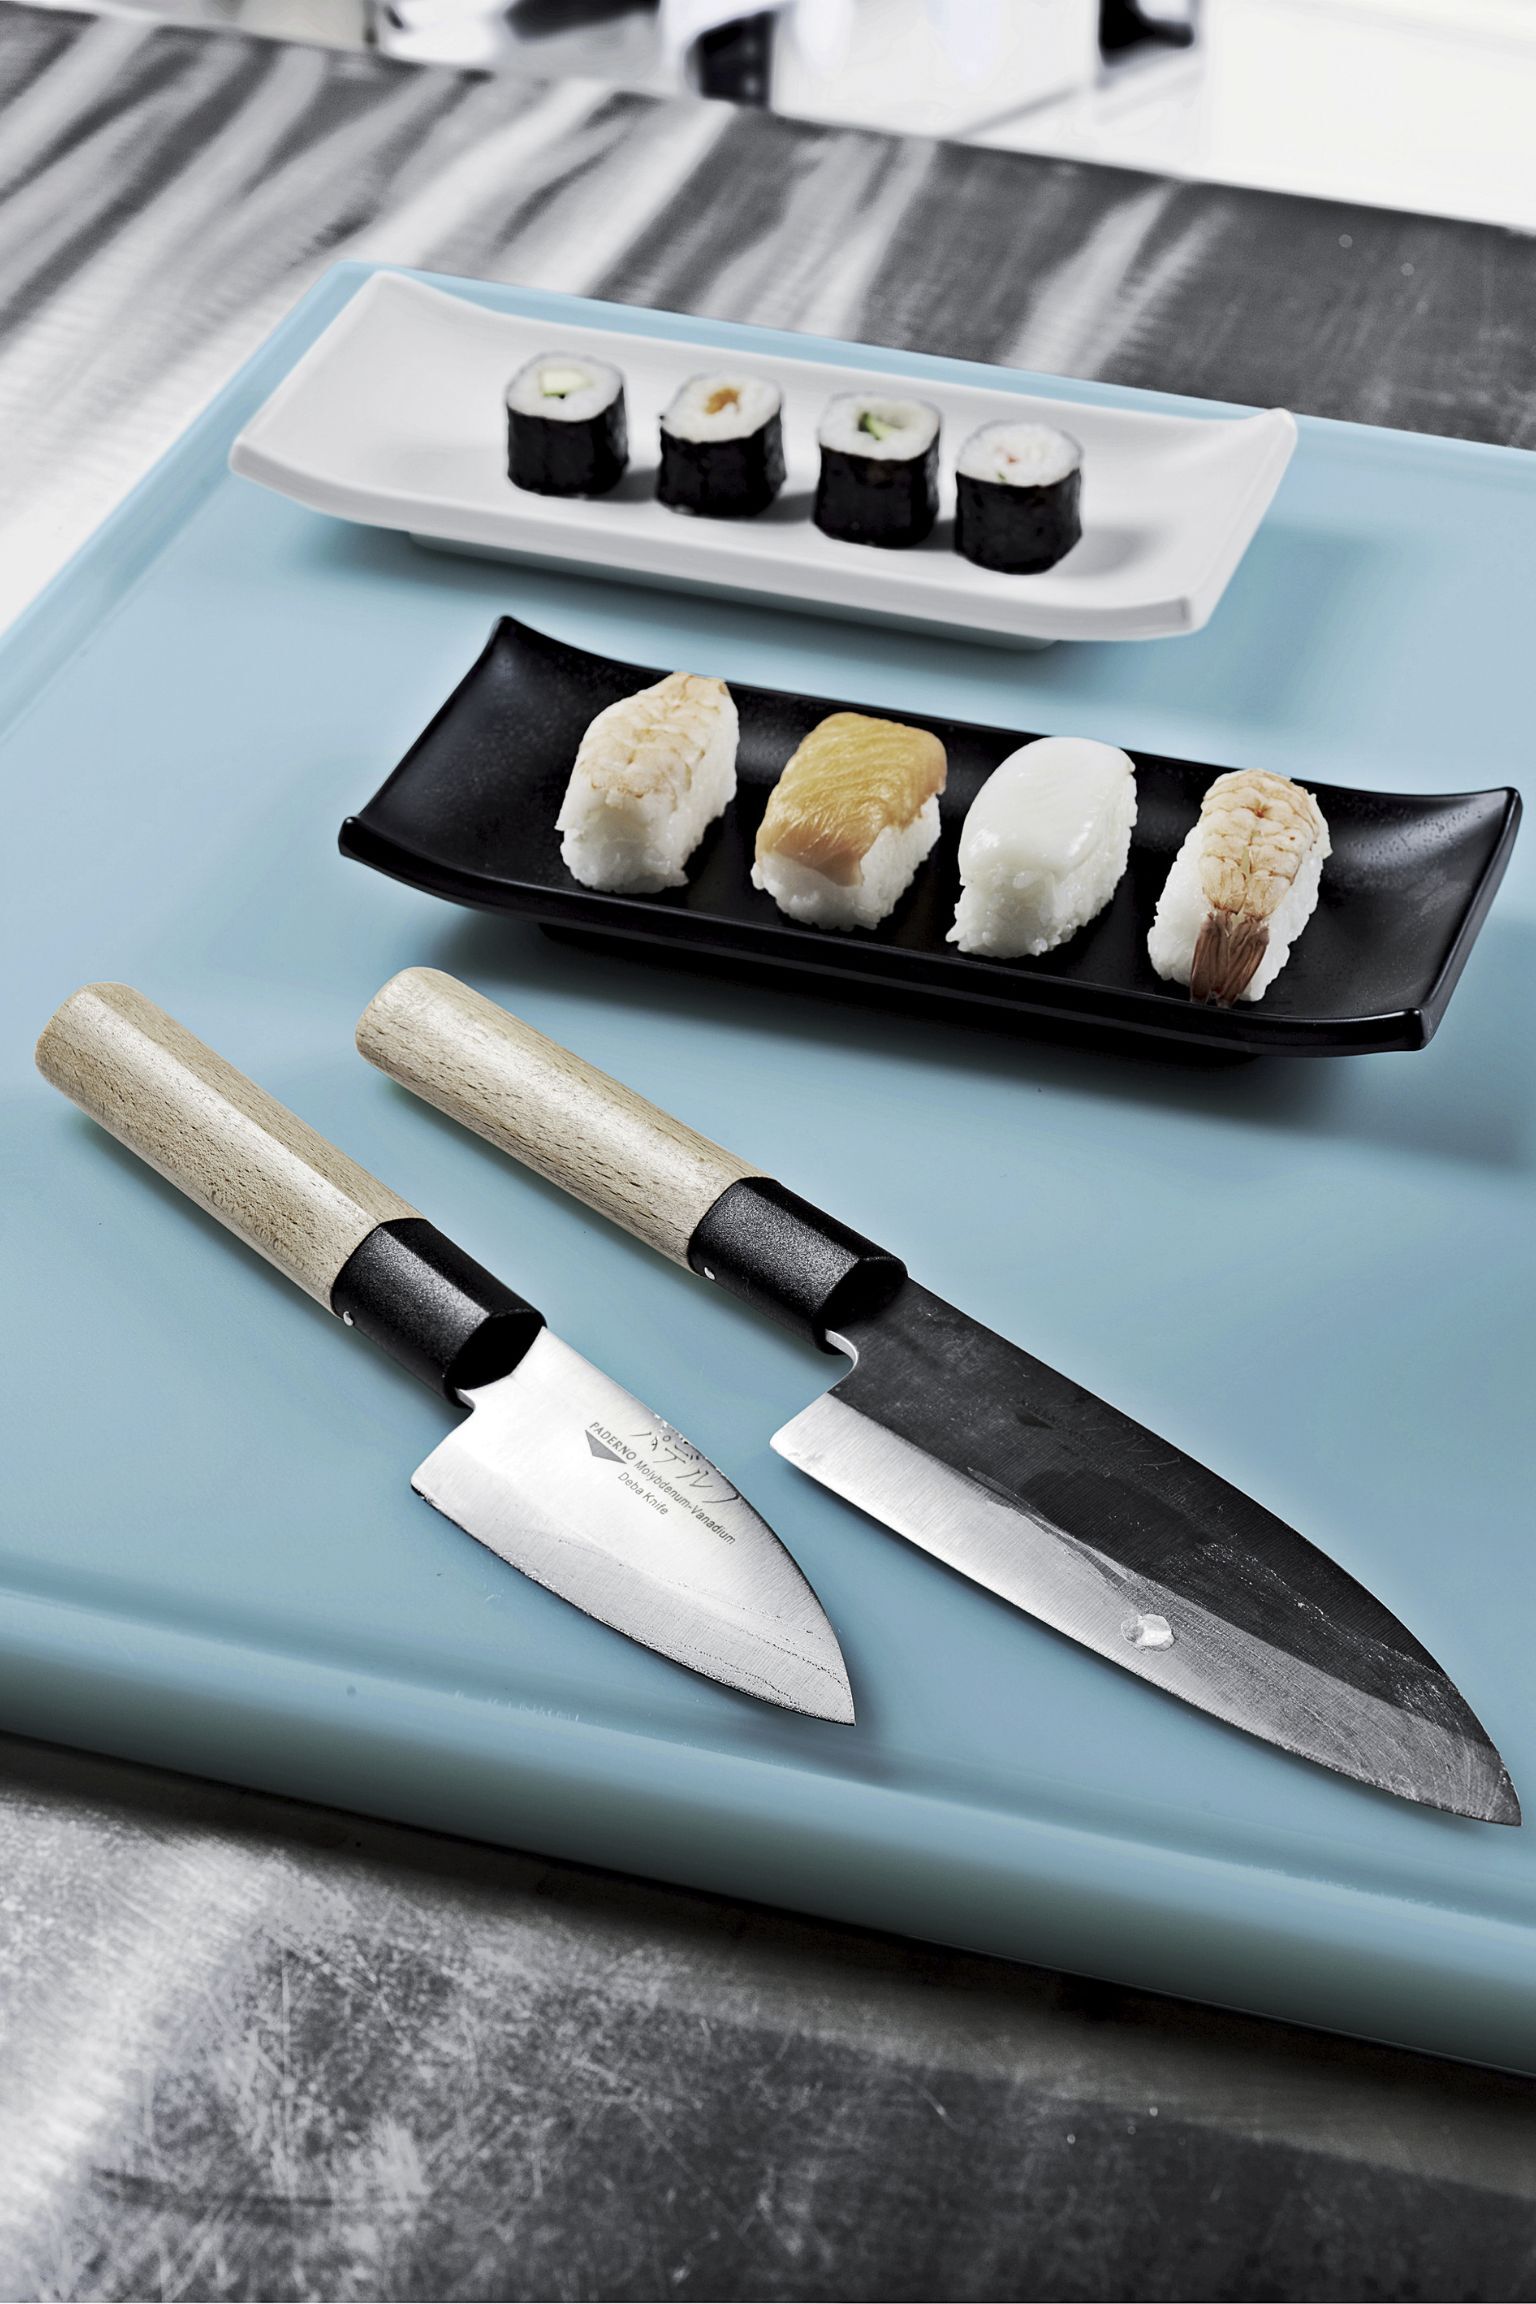 https://www.paderno.it/dw/image/v2/BGMT_PRD/on/demandware.static/-/Library-Sites-pad-library-shared/default/dw3759c77f/plp-sushi_e_cucina_etnica/Vertical_Pad_Japan-Knives_1536x2304.jpg